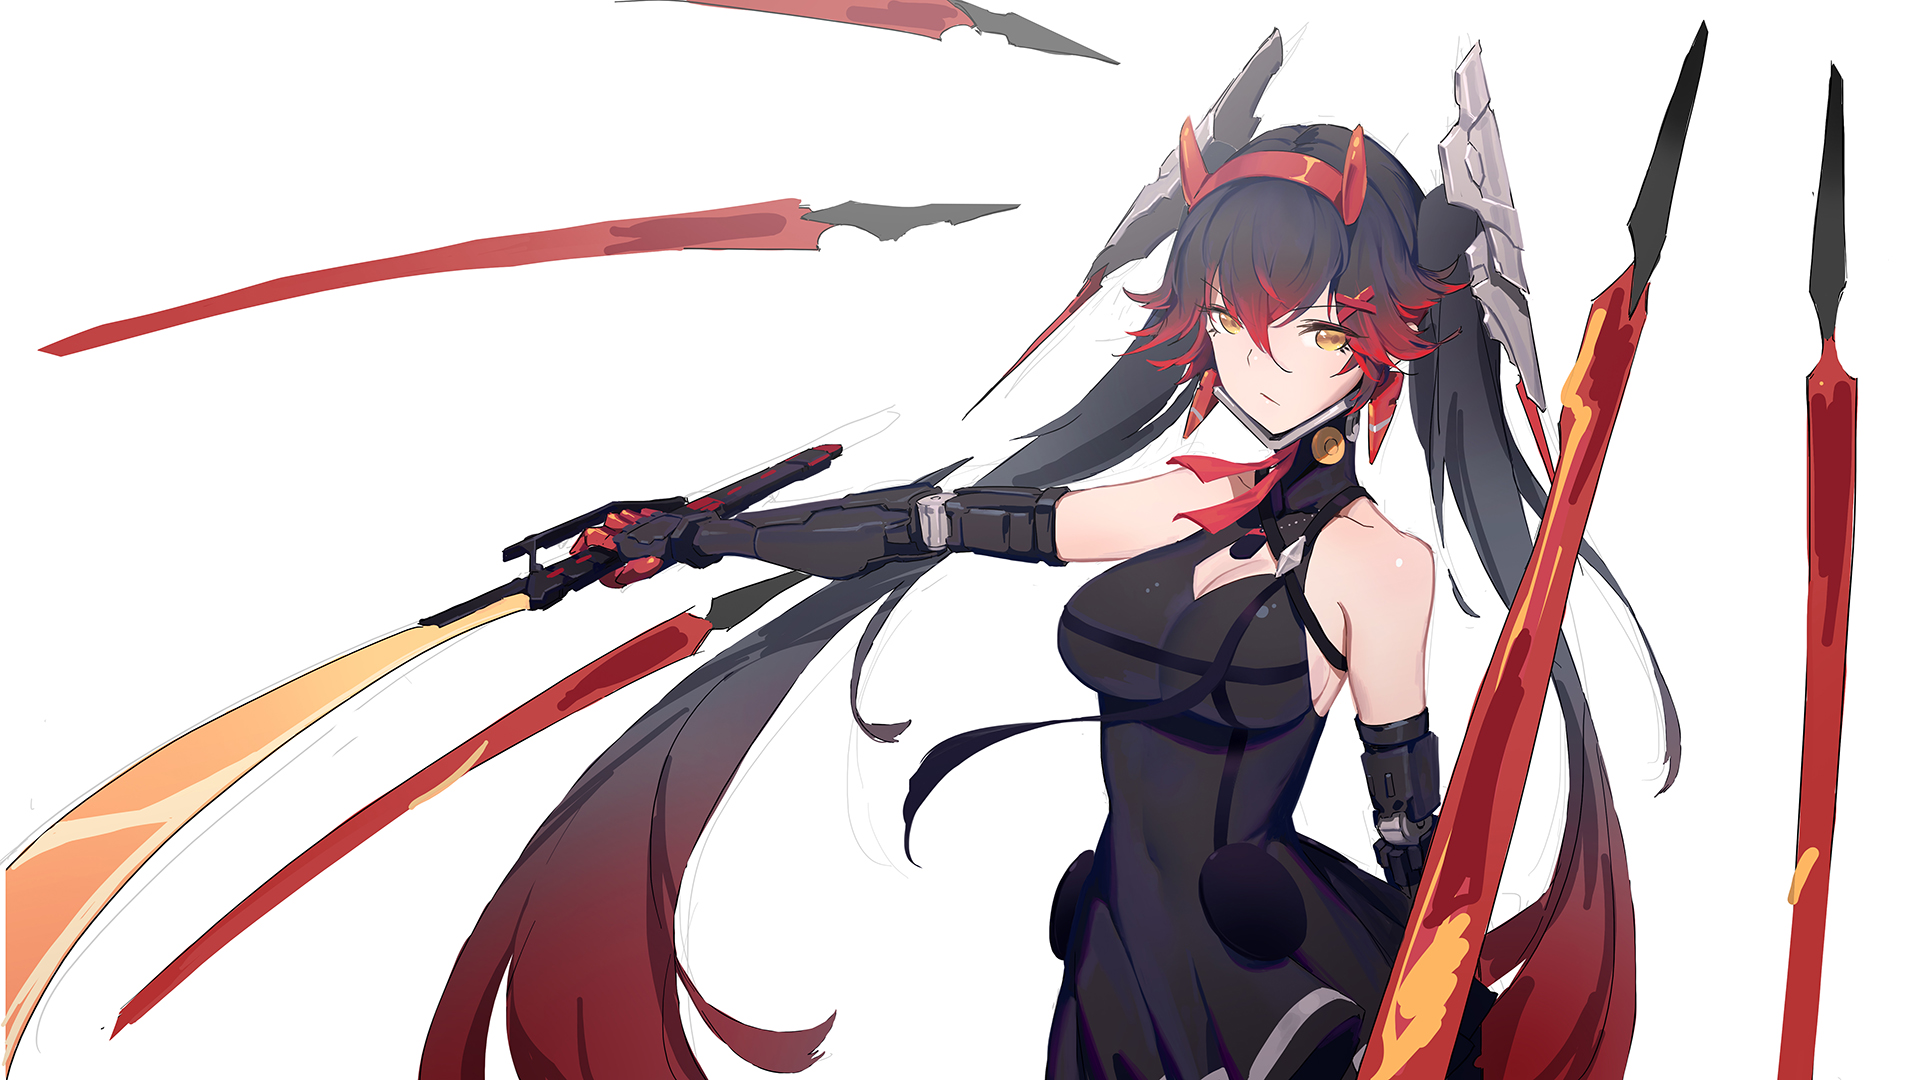 Anime 1920x1080 anime anime girls portrait display HUANG dress sword horns twintails brown eyes multi-colored hair Punishing: Gray Raven